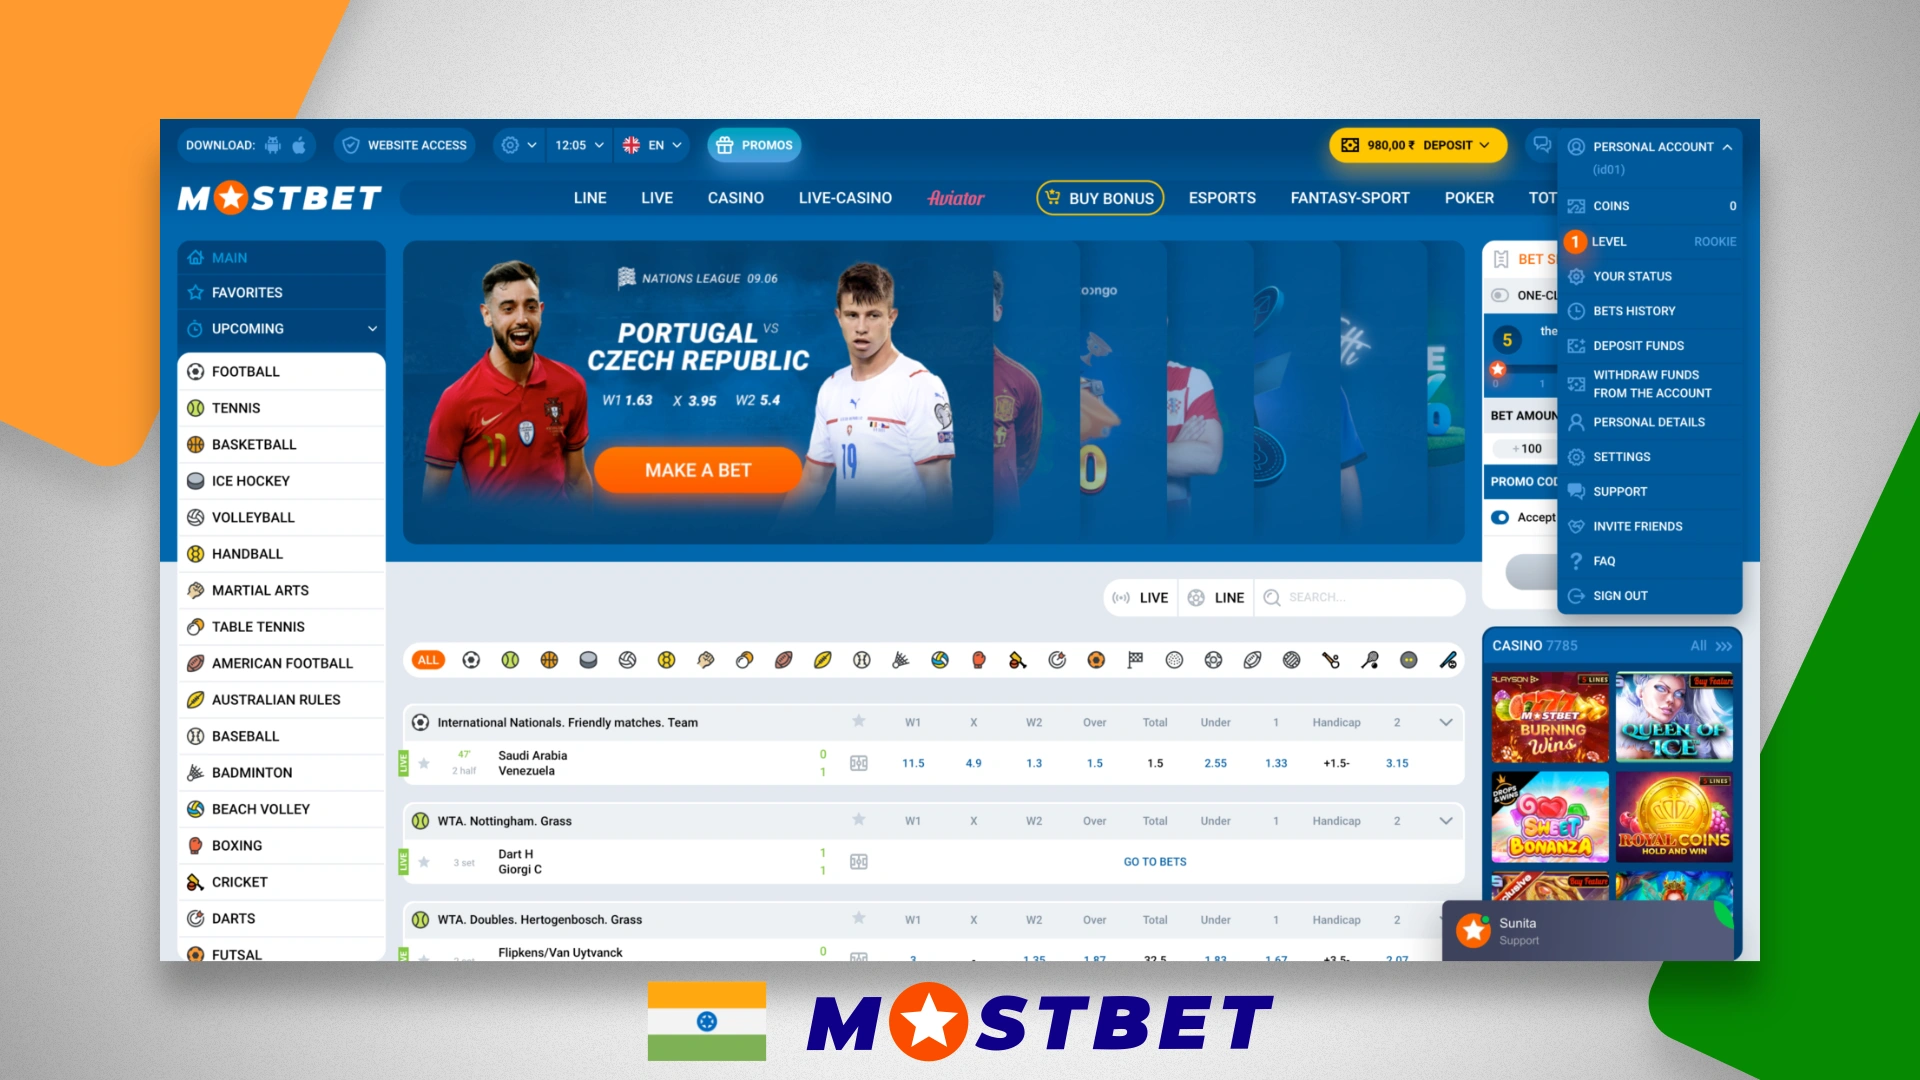 Home page of the official site for sports betting Mostbet India